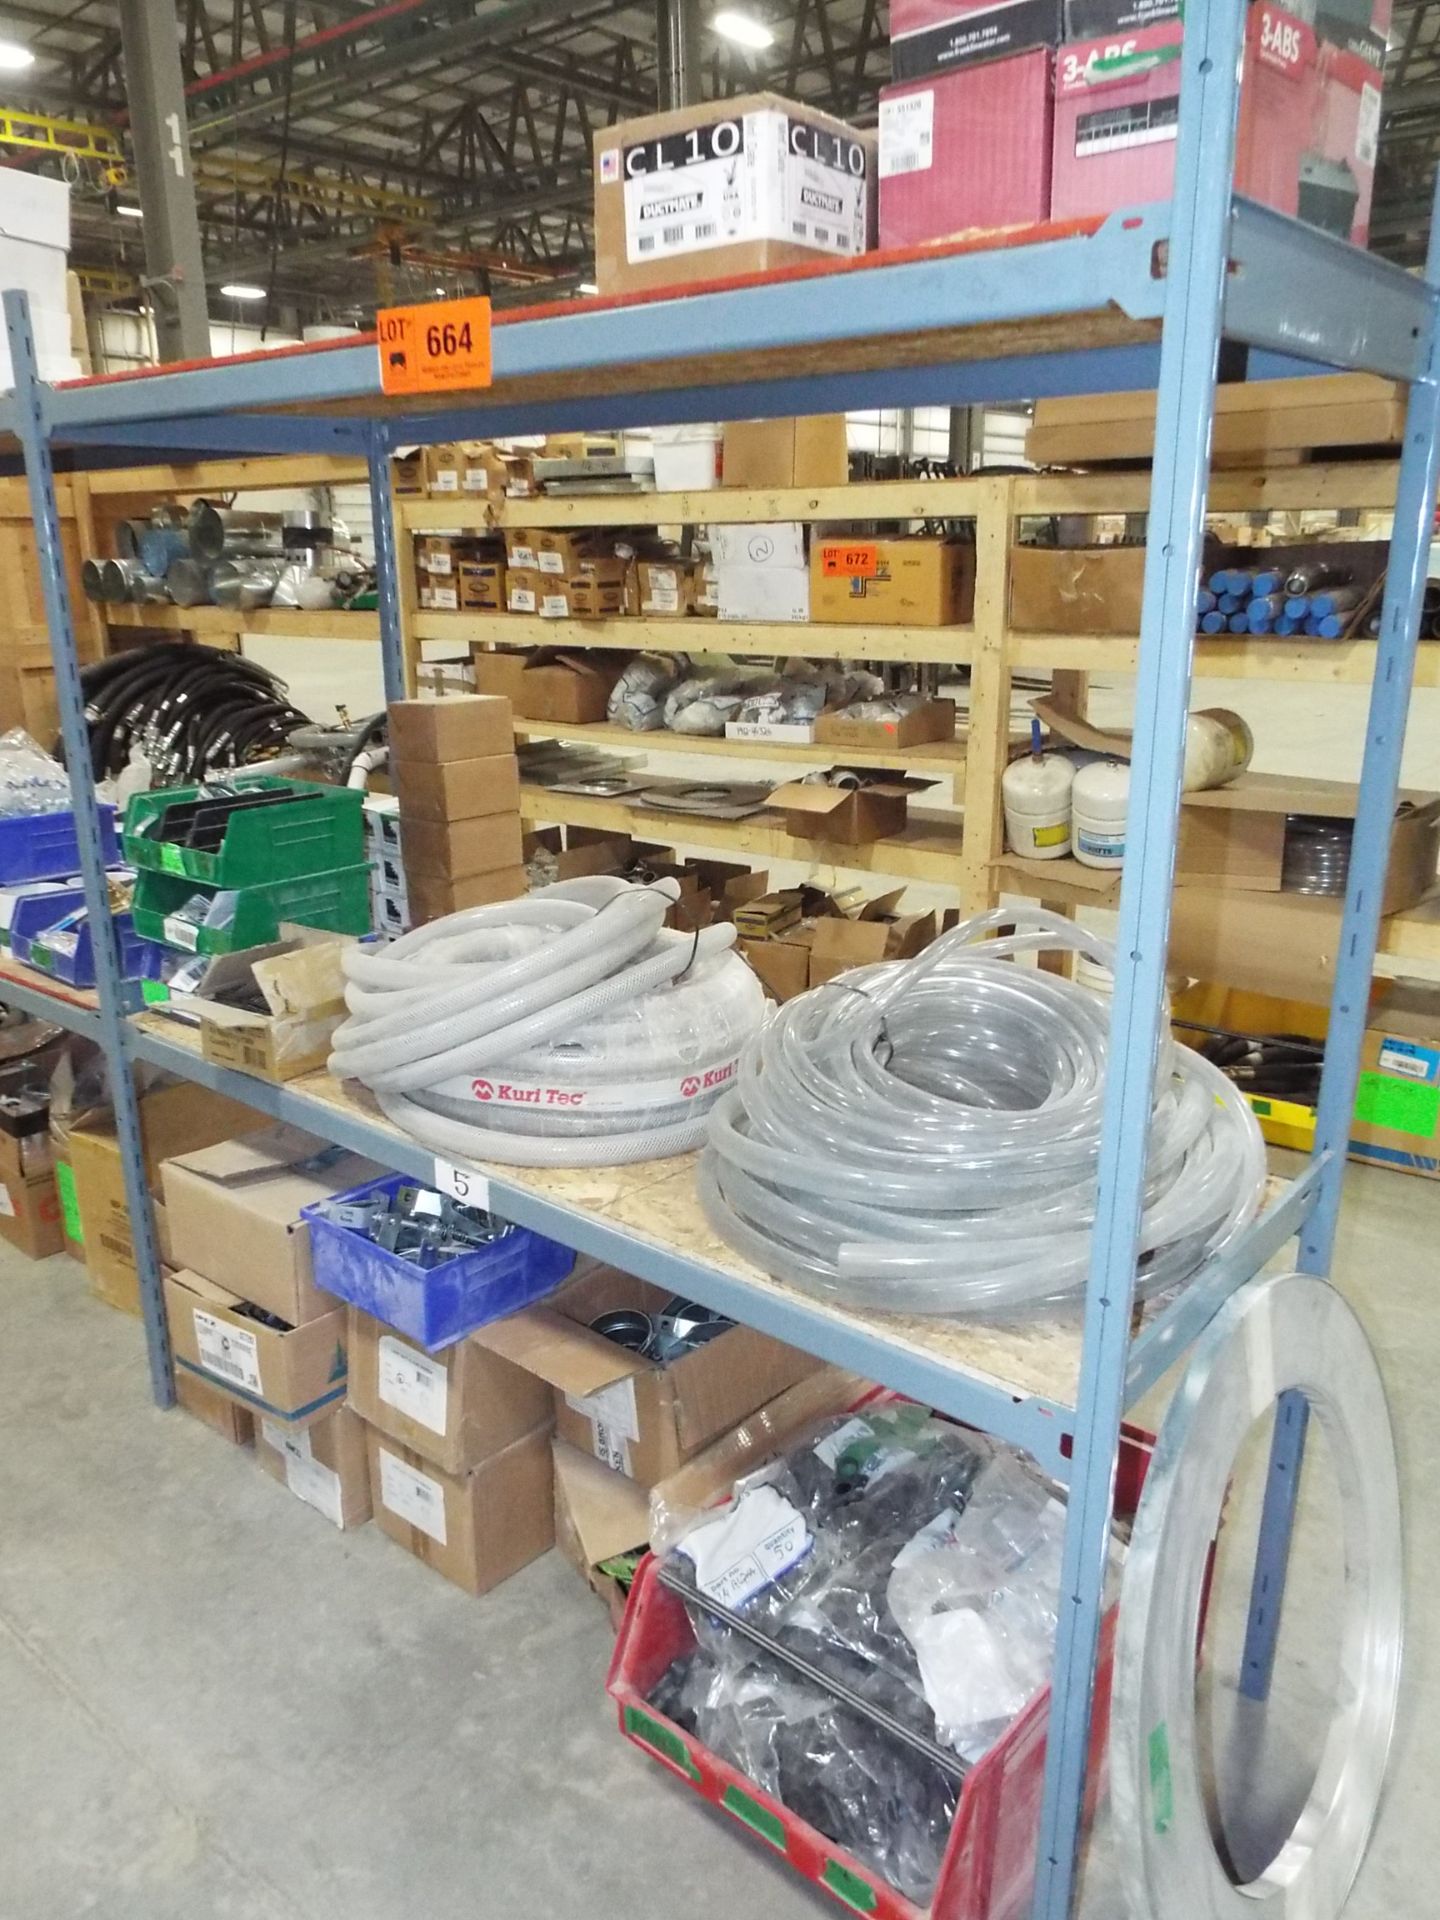 LOT/ SHELF AND CONTENTS - CLEAR PVC HOSE AND PLUMBING SUPPLIES